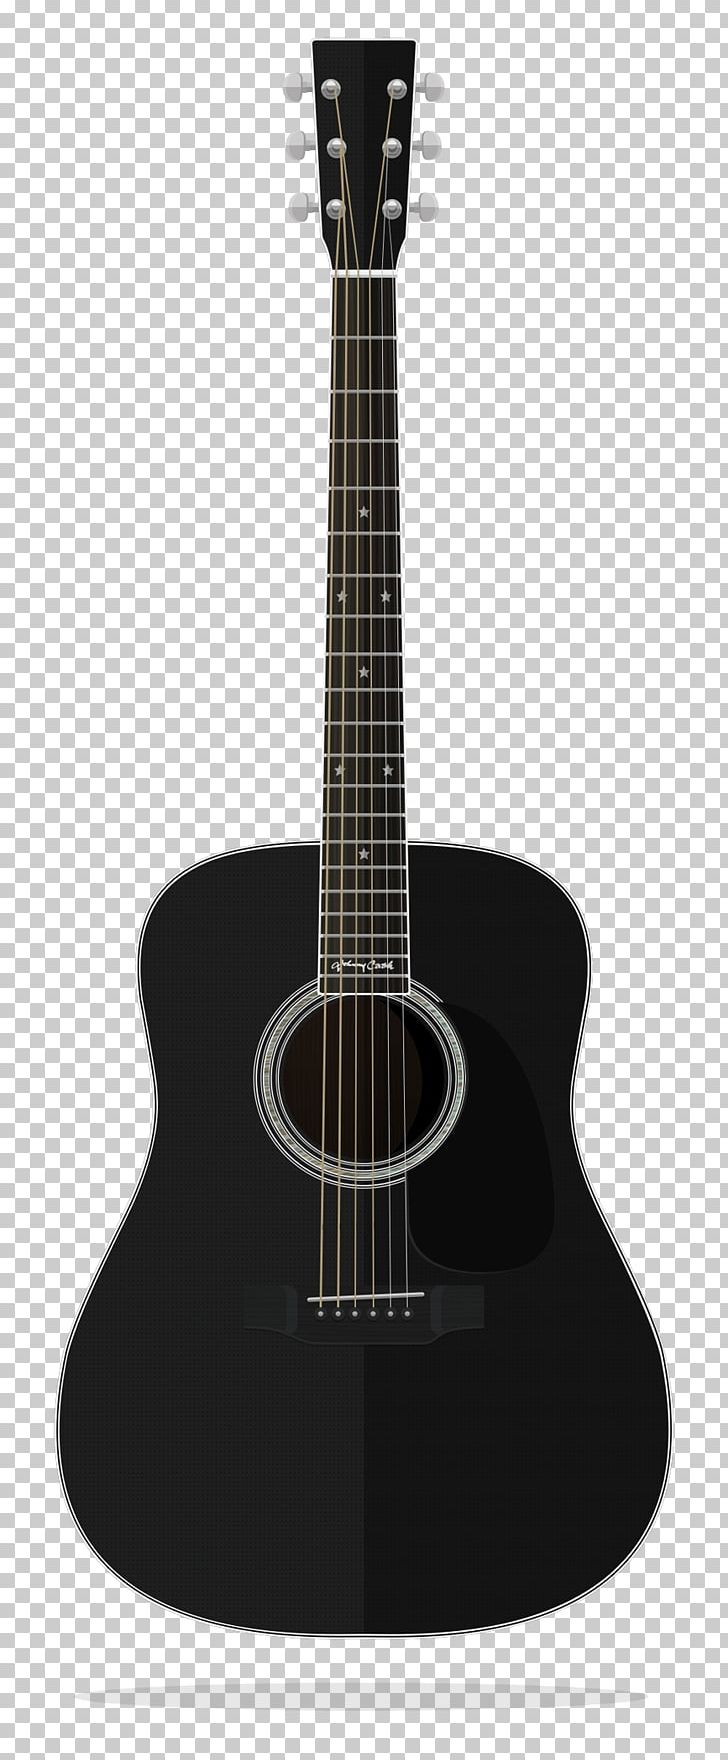 Fender Stratocaster Acoustic Guitar Dreadnought String PNG, Clipart, Classical Guitar, Cuatro, Guitar Accessory, Guitar Picks, Johnny Cash Free PNG Download